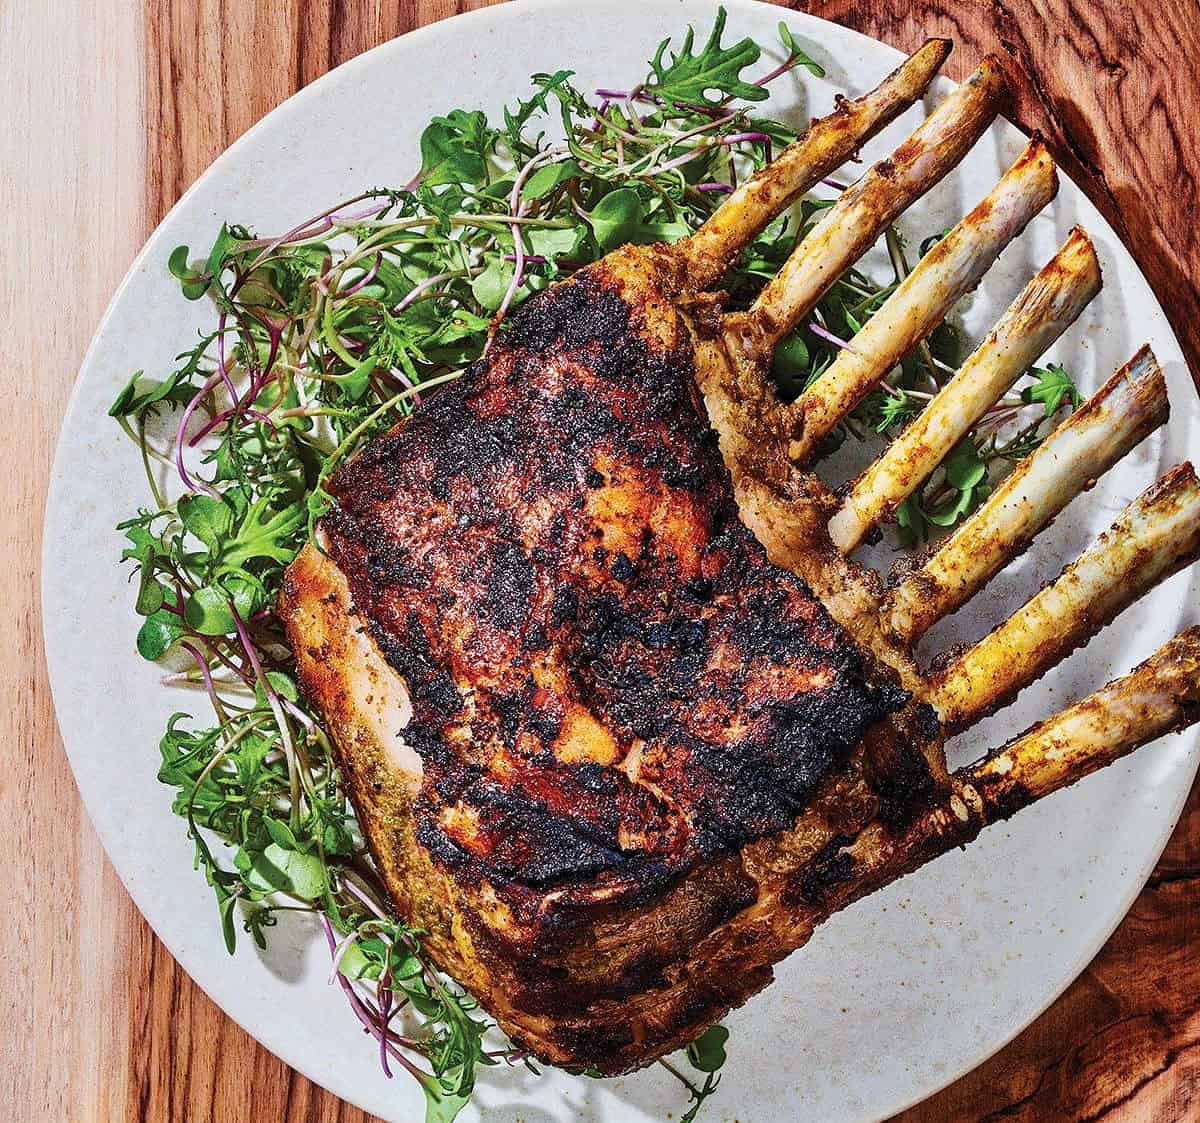  This juicy, tender and oh-so-flavorful grilled rack of lamb will have your taste buds dancing with joy.